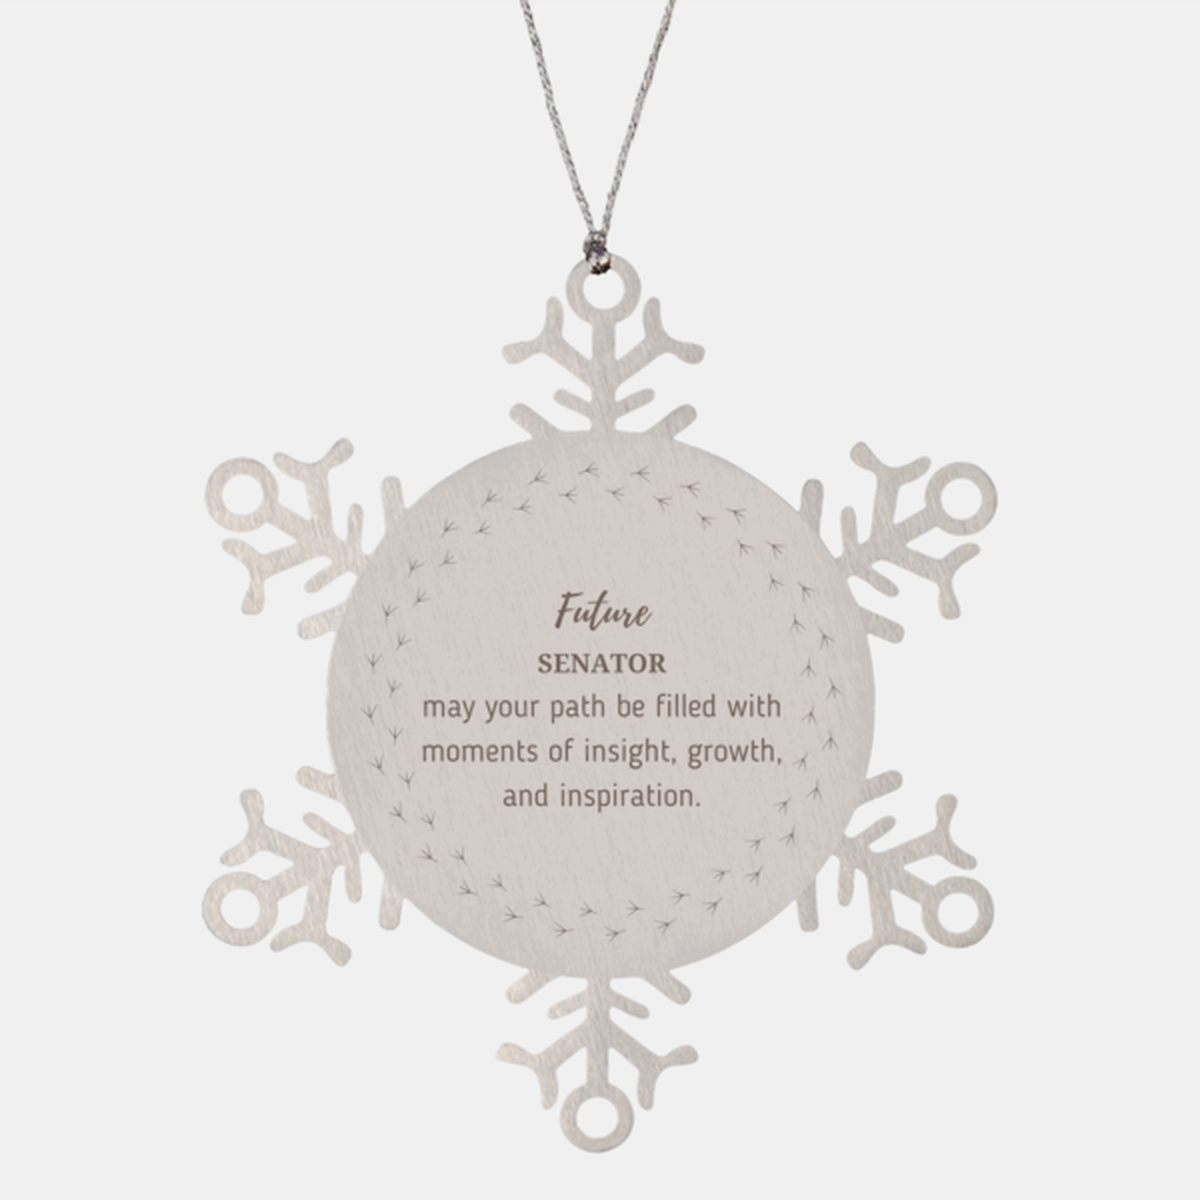 Future Senator Gifts, May your path be filled with moments of insight, Graduation Gifts for New Senator, Christmas Unique Snowflake Ornament For Men, Women, Friends